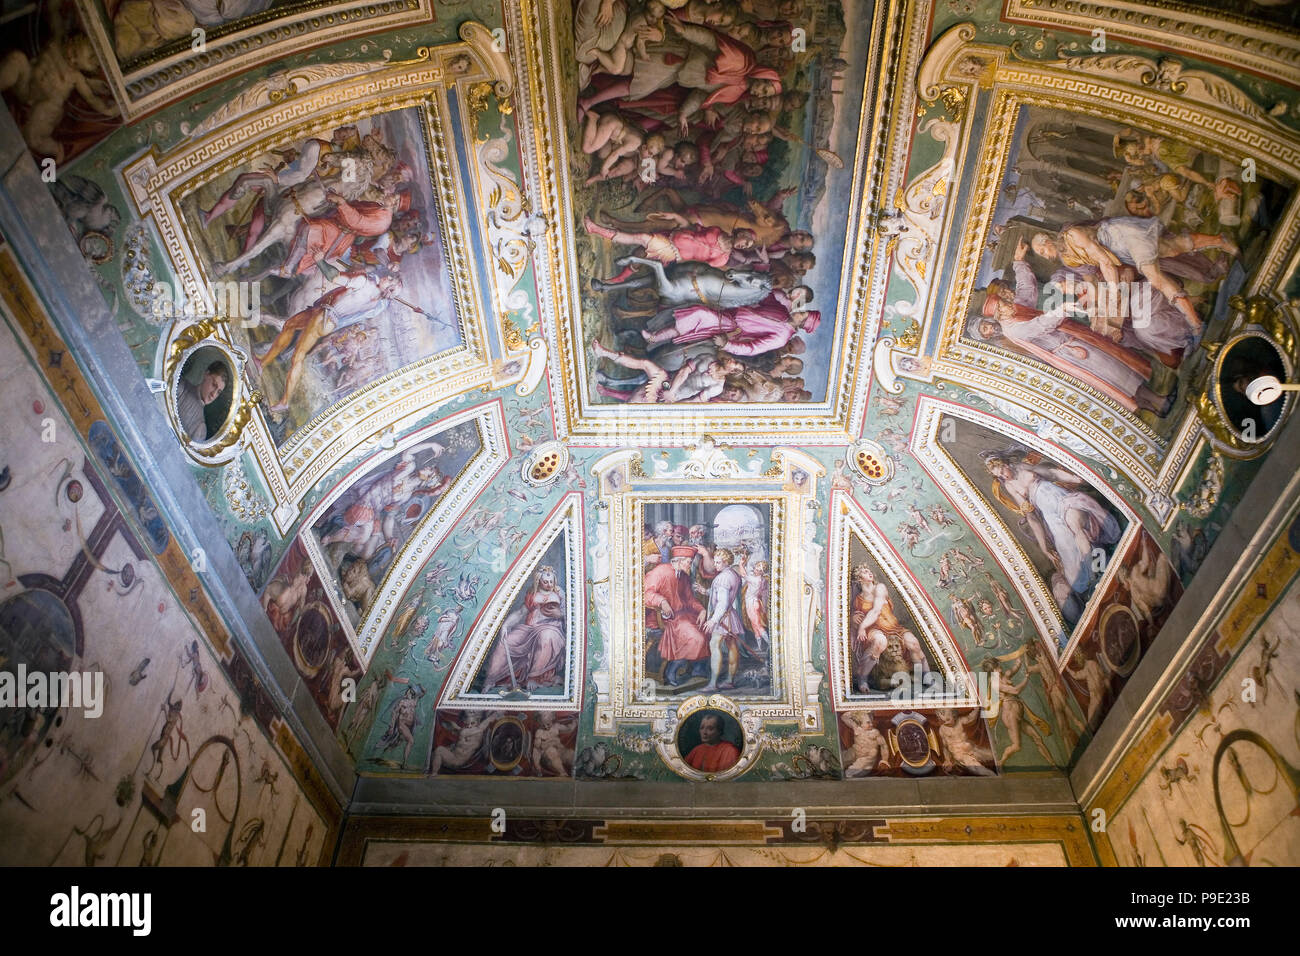 Ceiling of the Room of Cosimo the Elder, Palazzo Vecchio, Florence, Tuscany, Italy Stock Photo